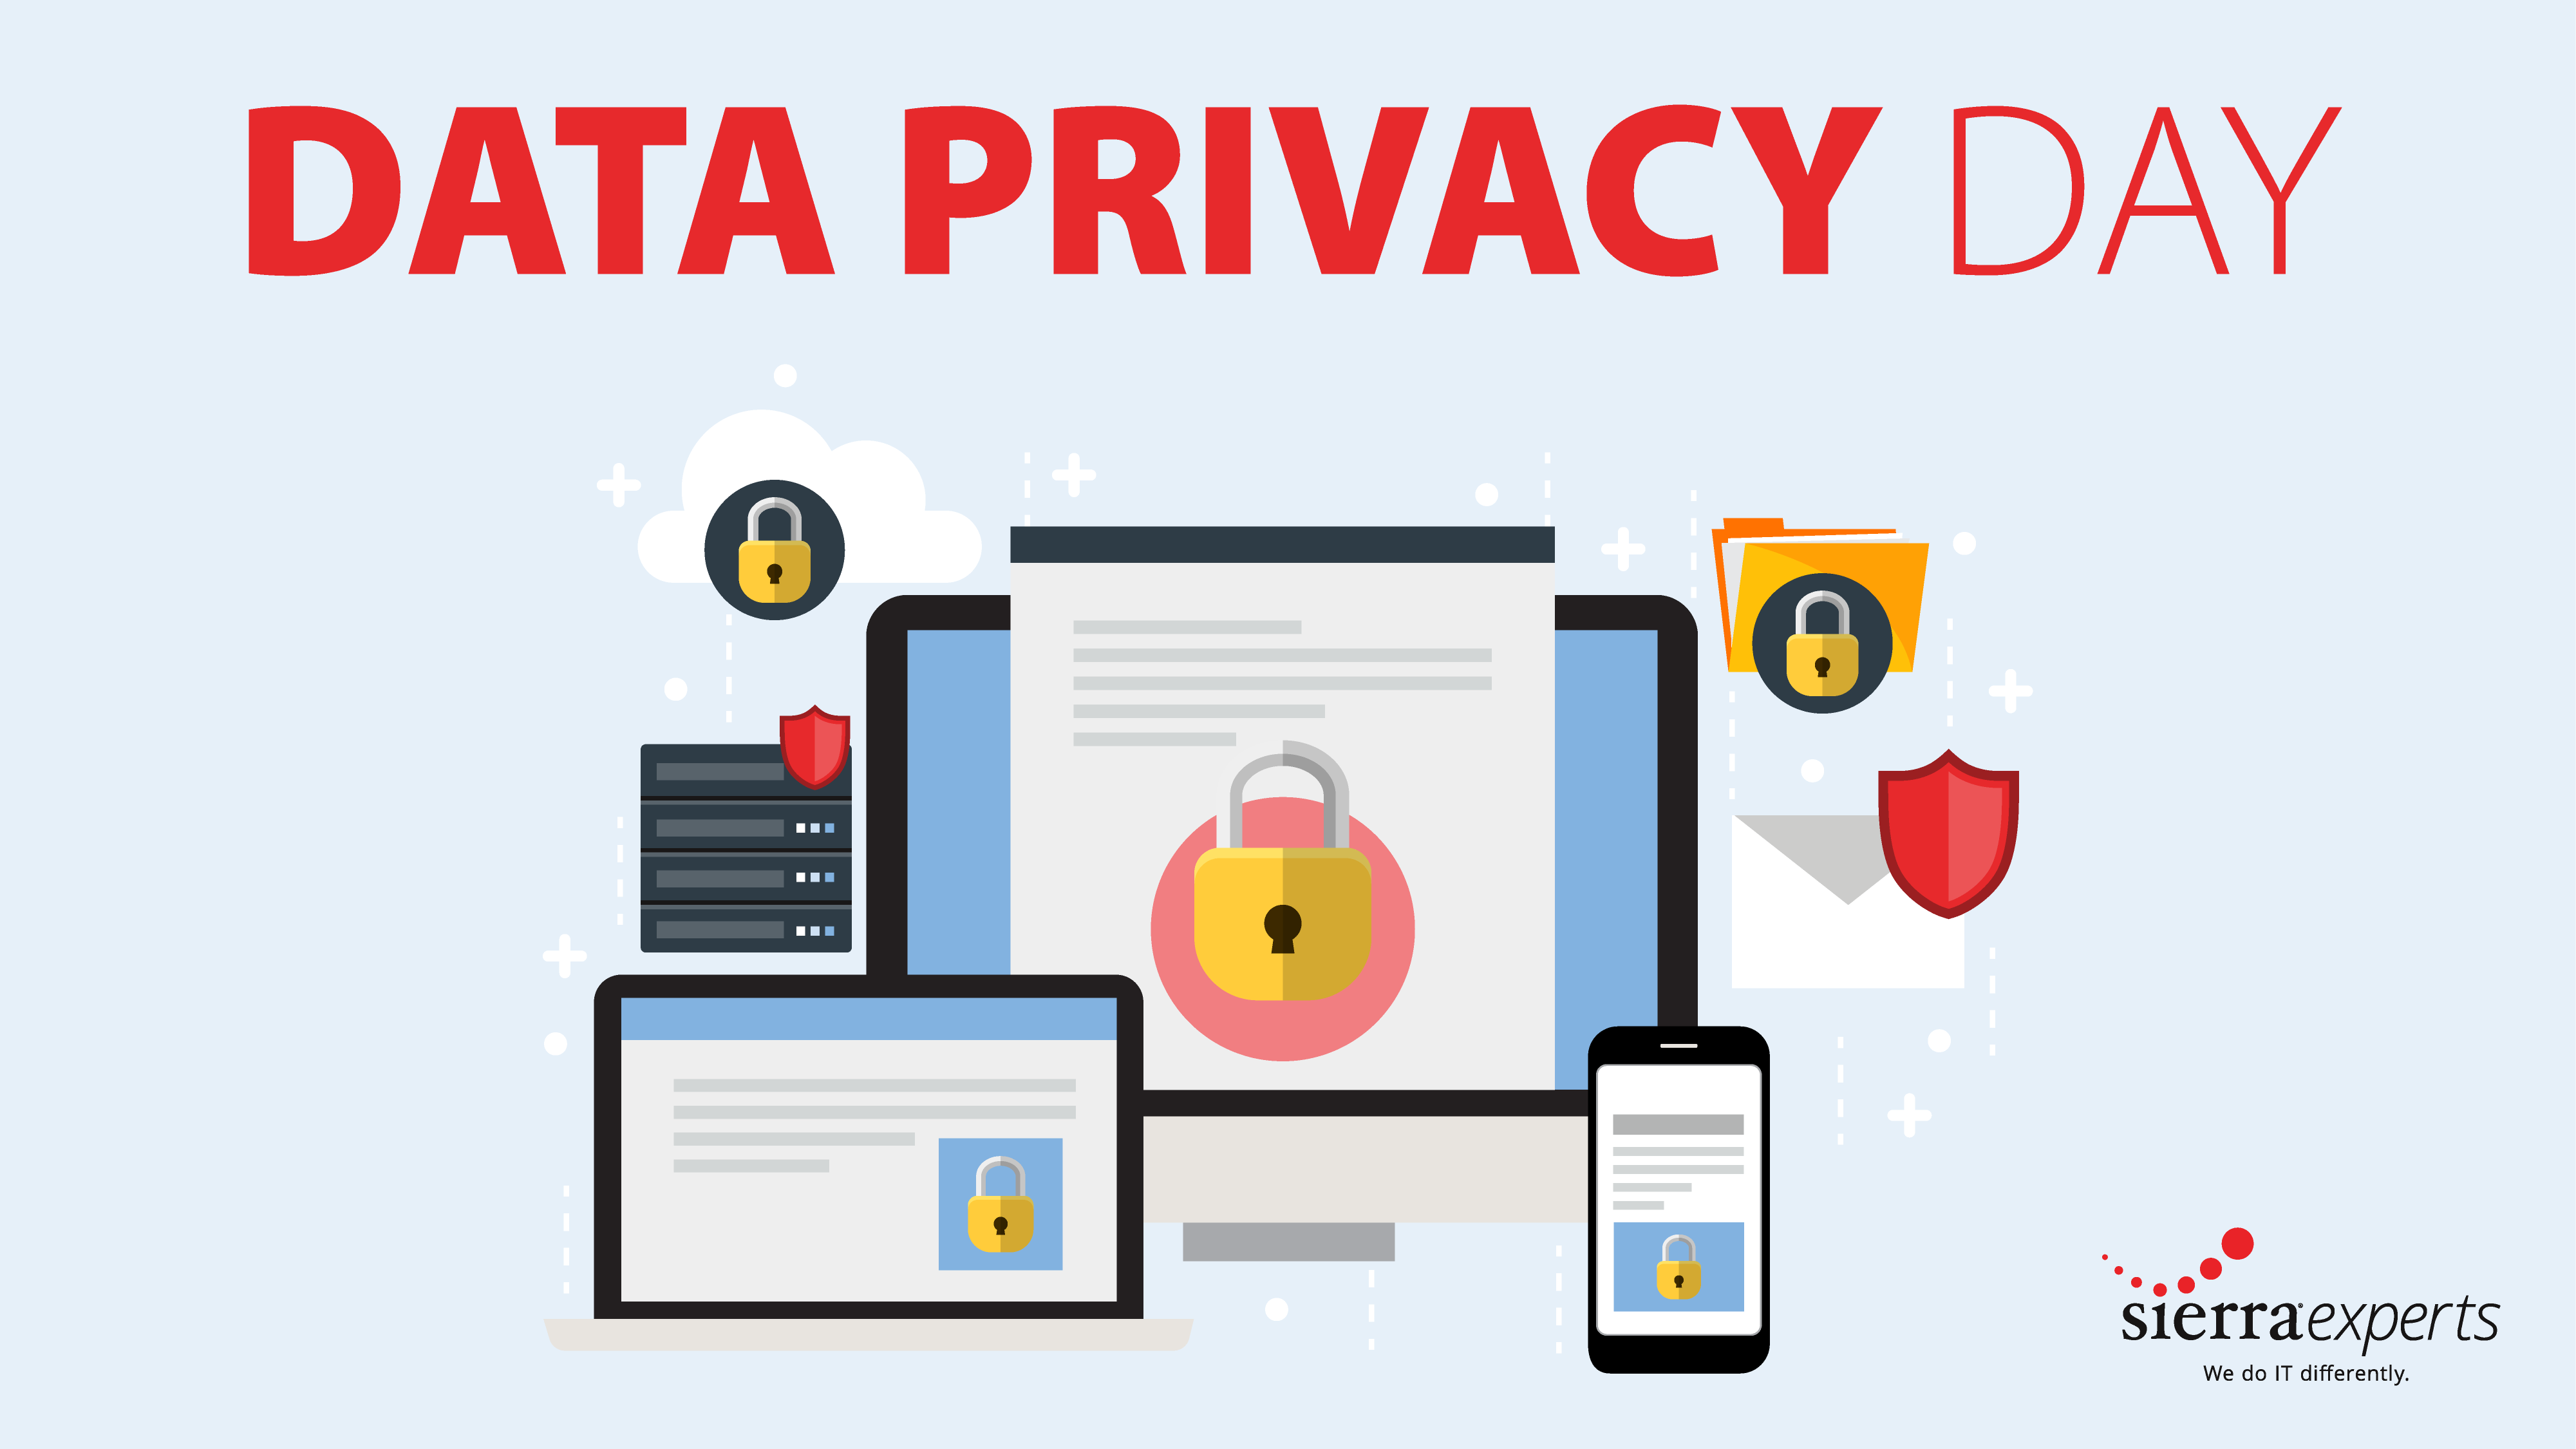 Stay Secure on Data Privacy Day!